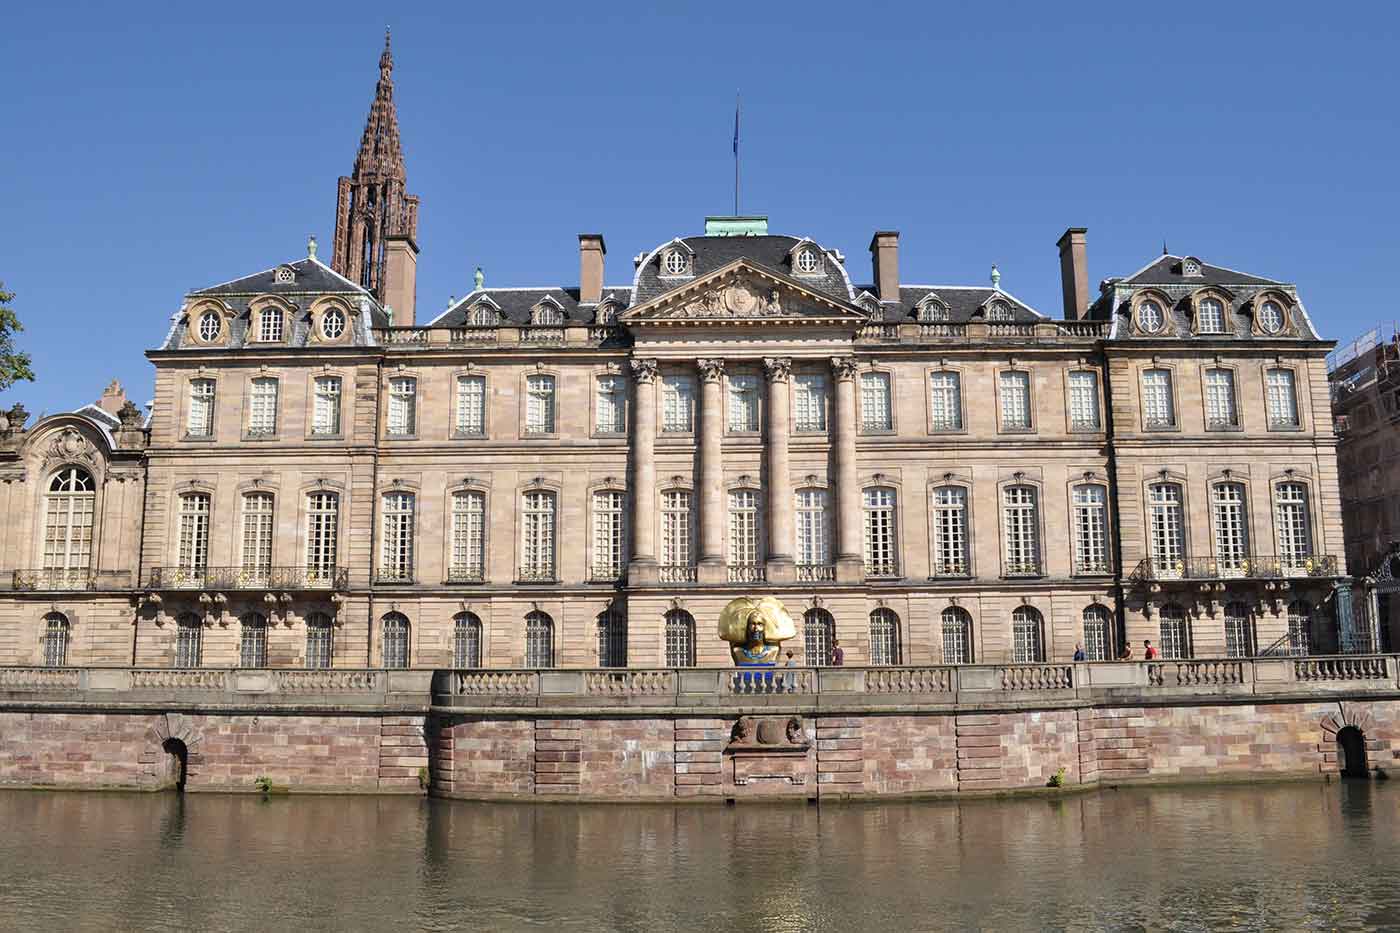 Cool 16 Tourist Attractions to See and Things to Do in Strasbourg, France